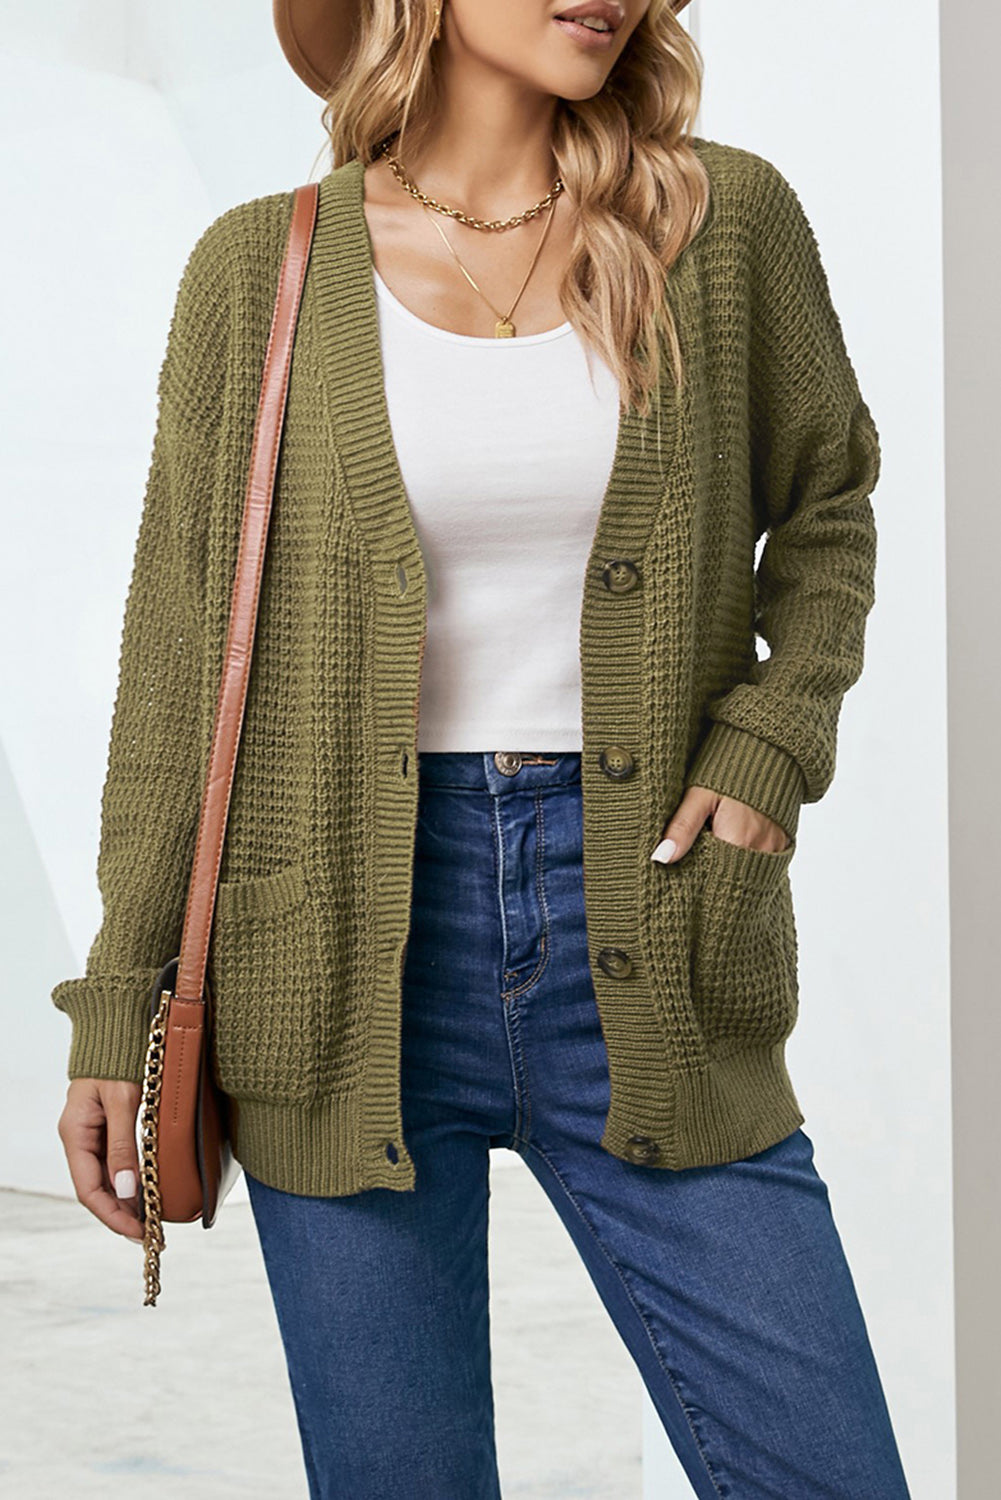 LADIES--Comfy Sweater--Drop Shoulder Button Down Pocketed Cardigan